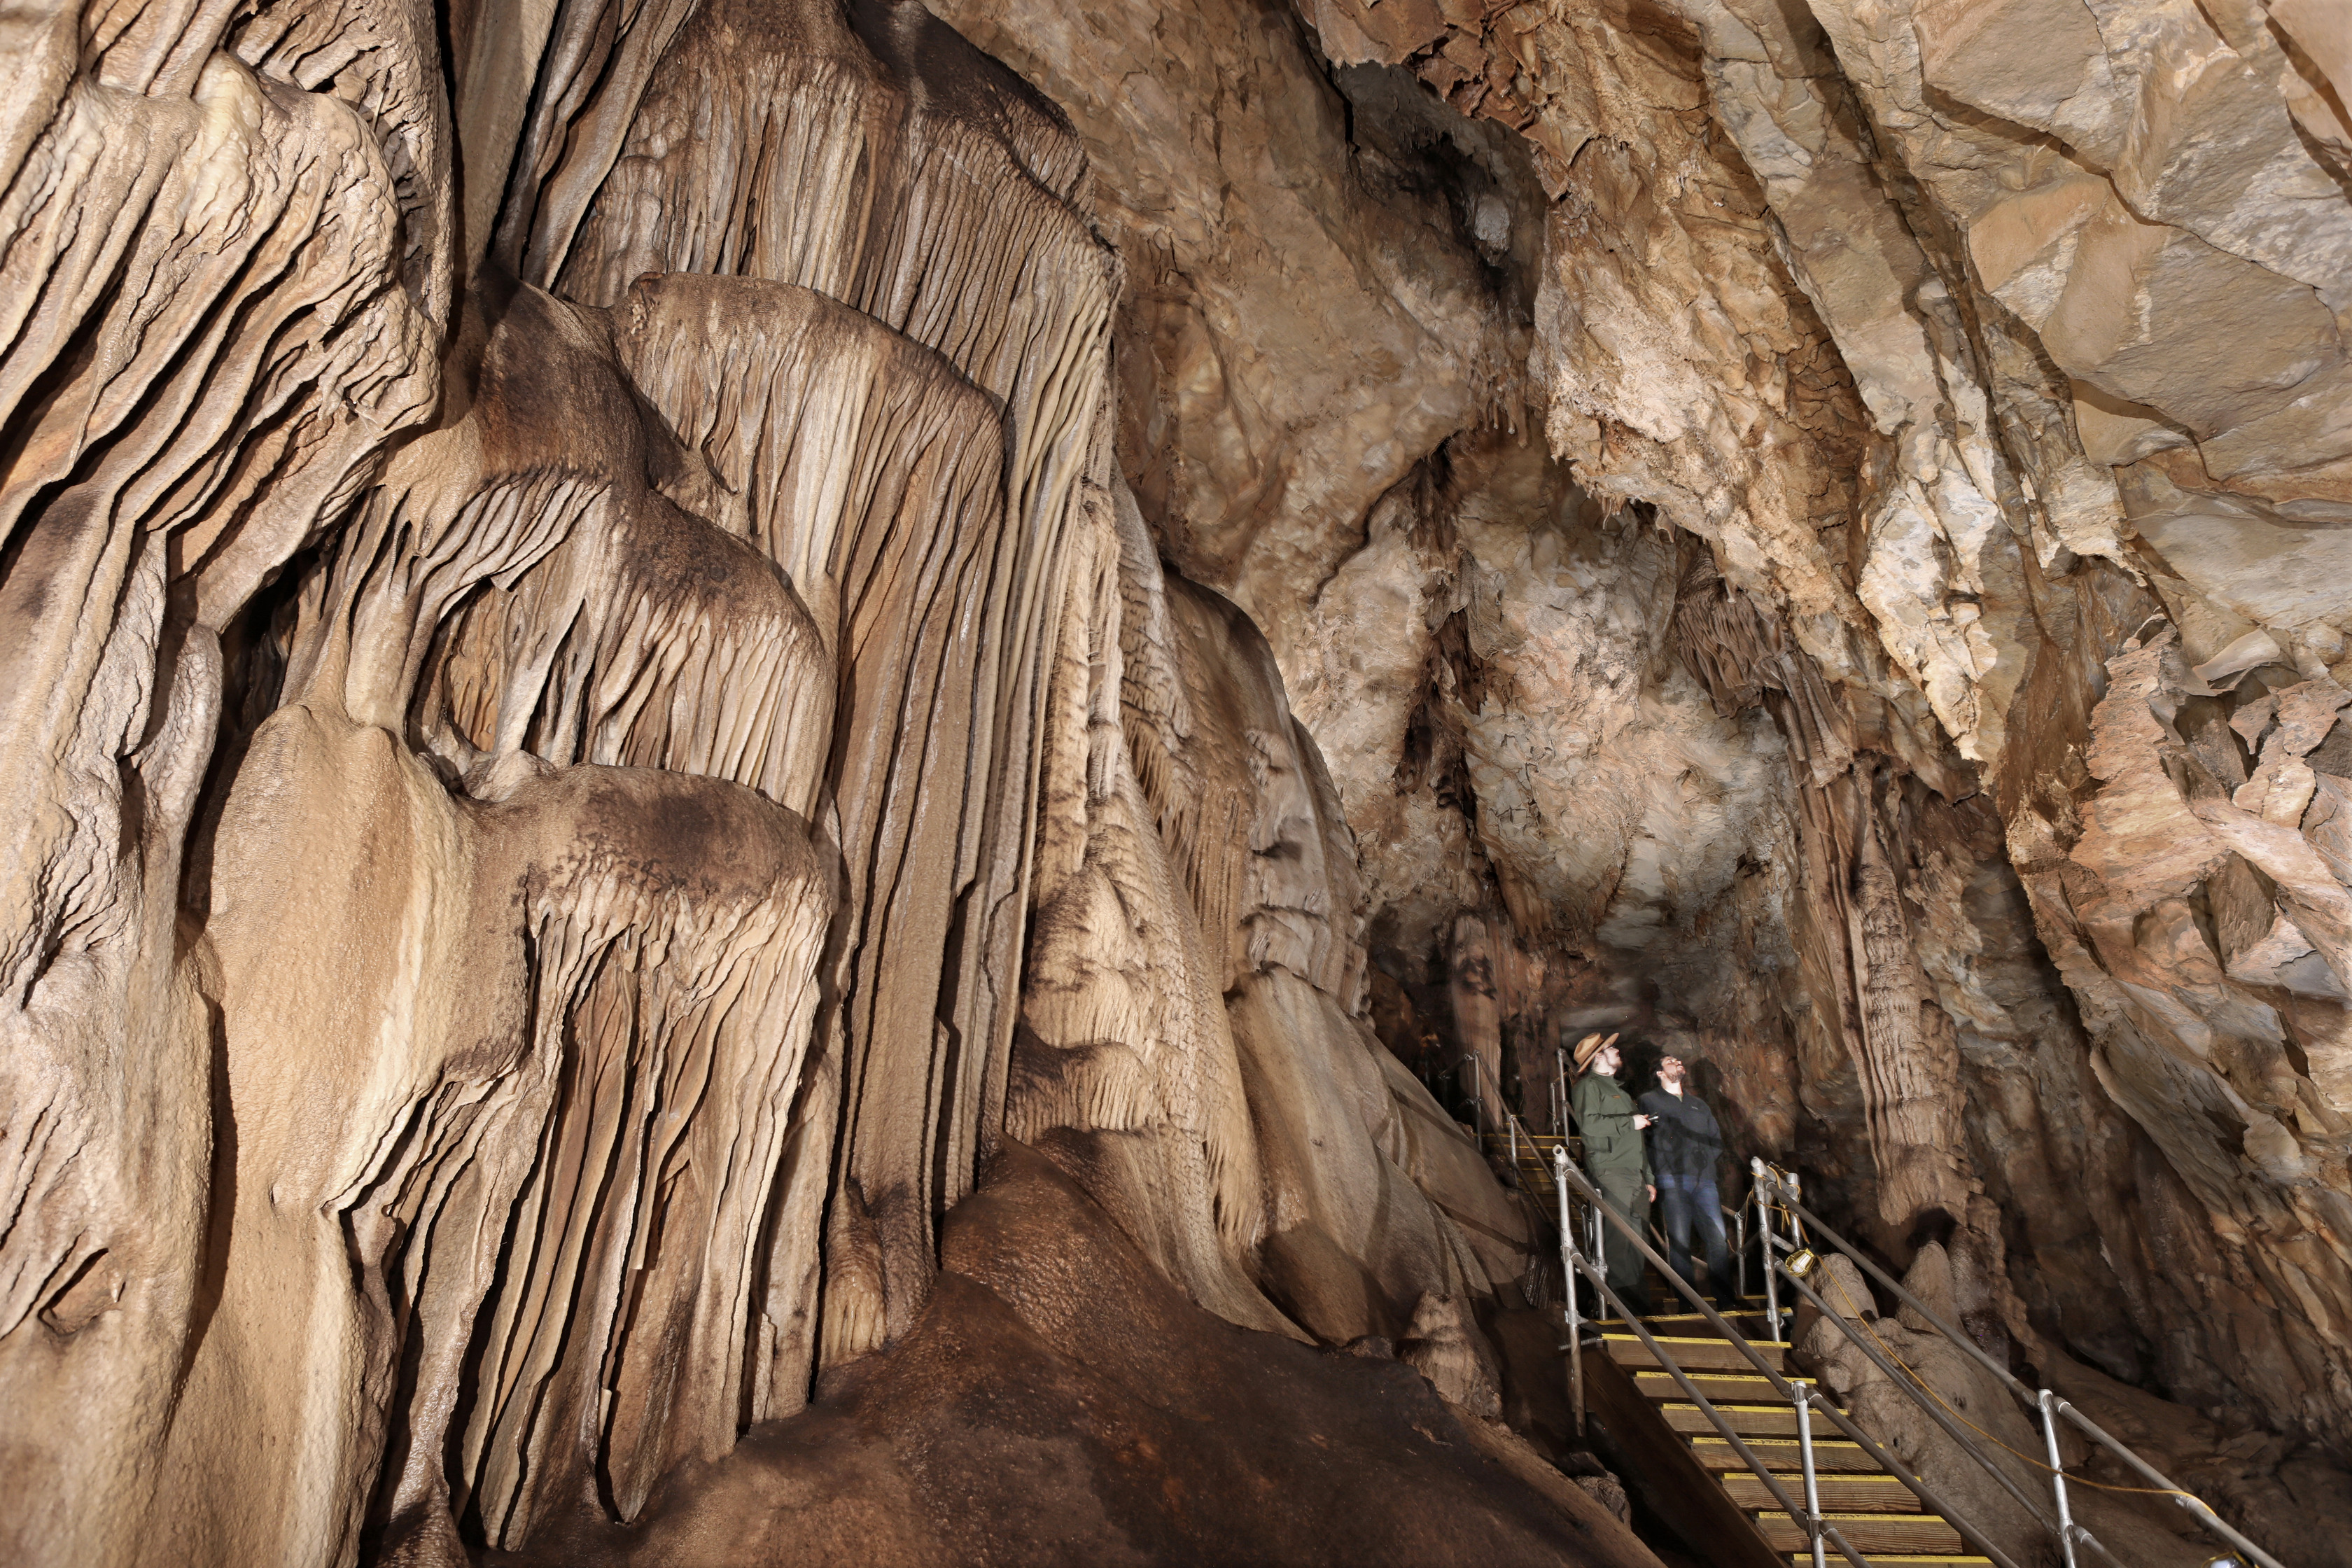 Cavers admiring the formations in cave.